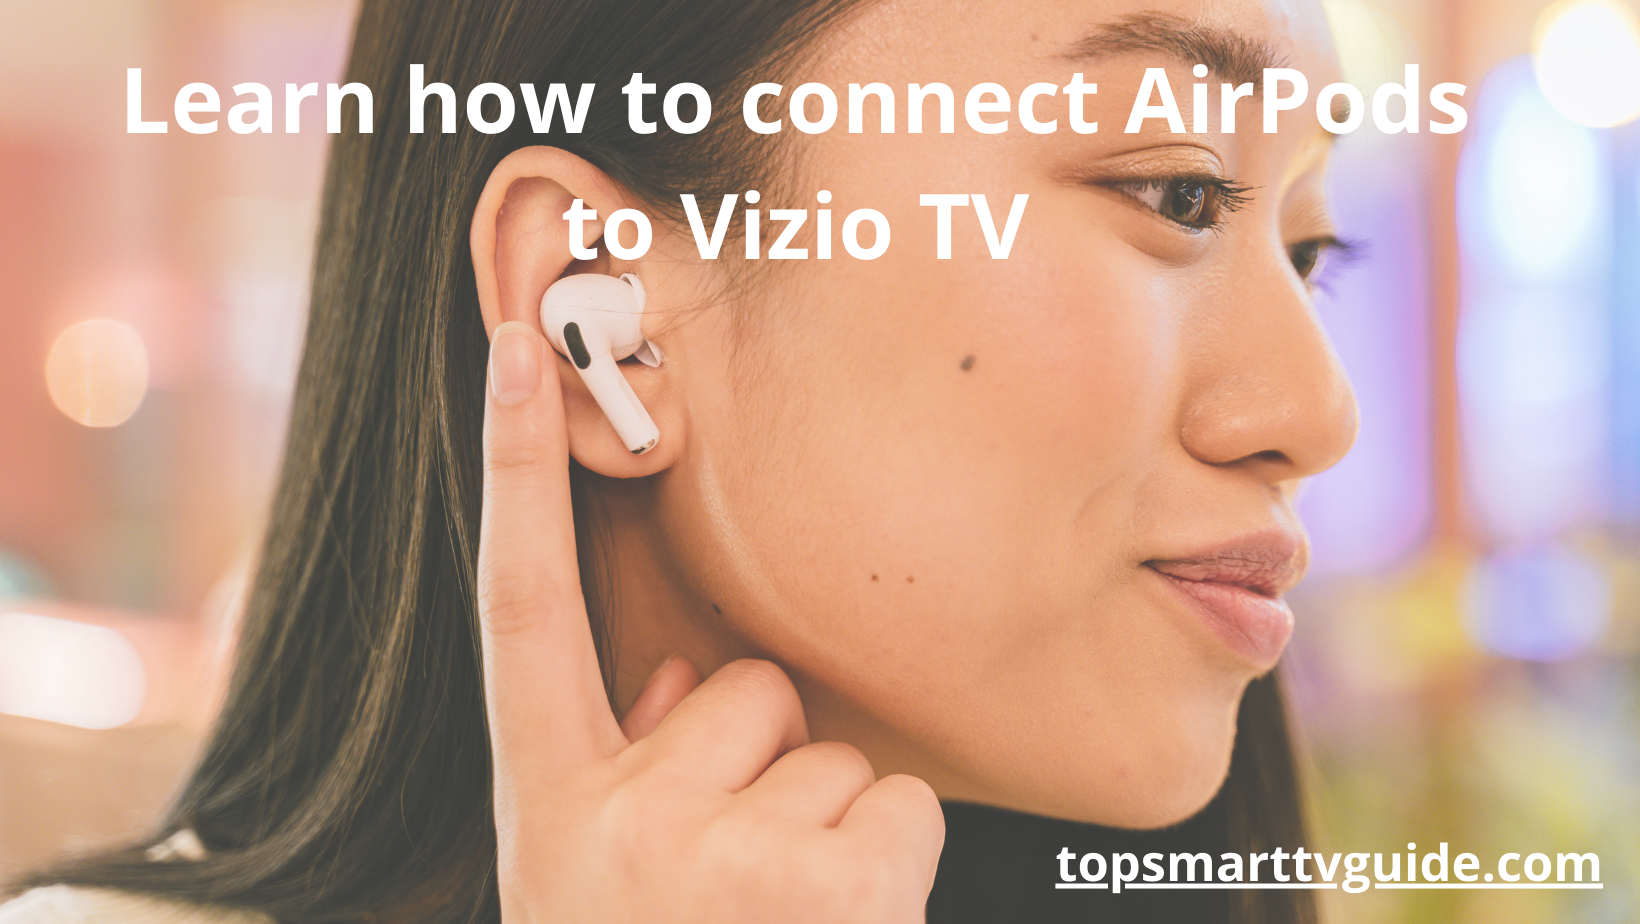 How to connect AirPods to Vizio TV: Best simple steps 2023